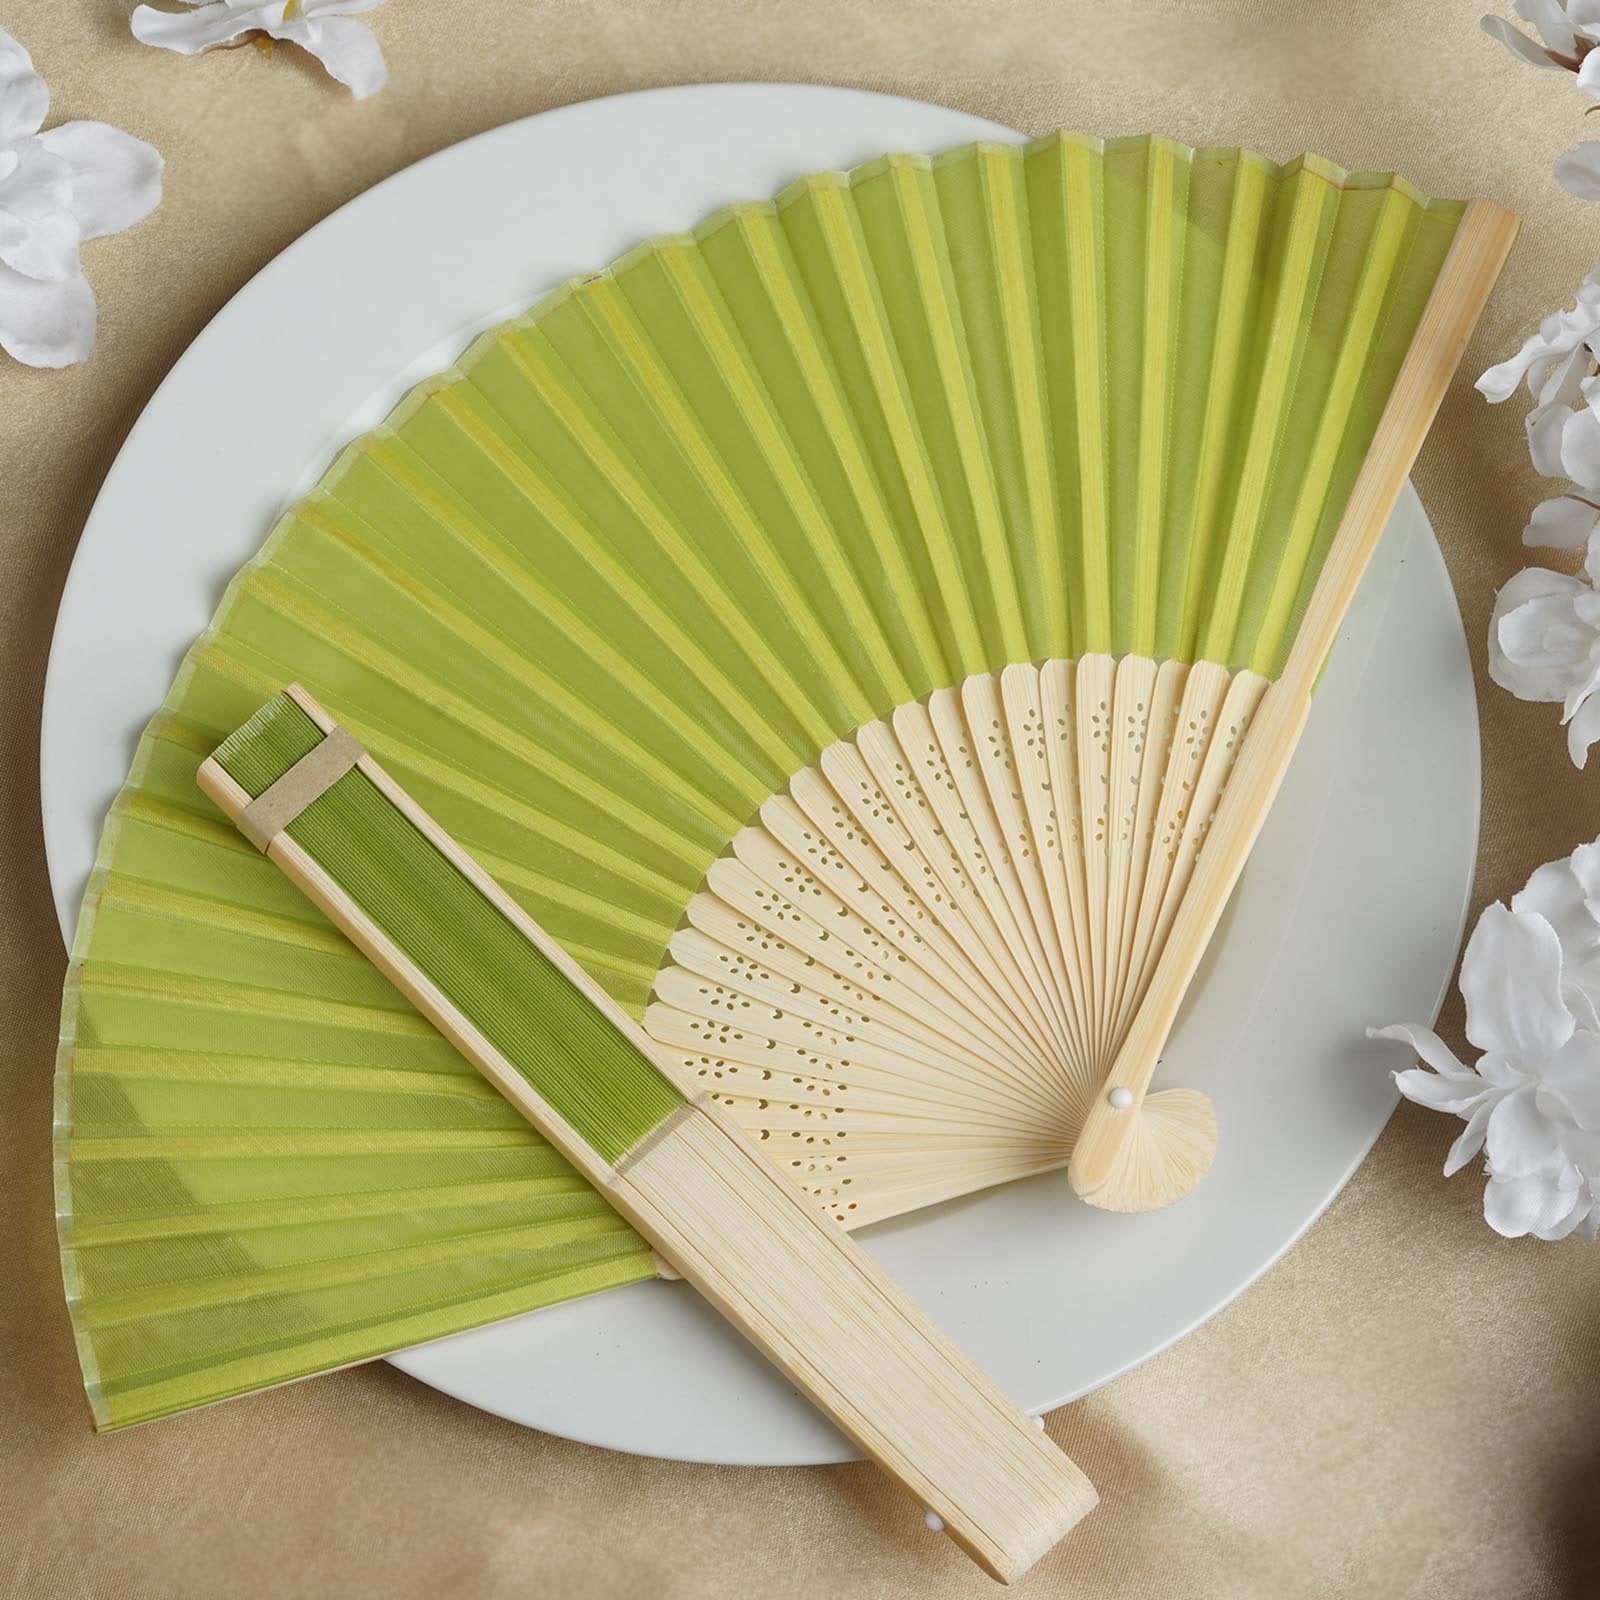 25 White Summer SILK FOLDING FANS Wedding Party Favors Decorations Supplies 